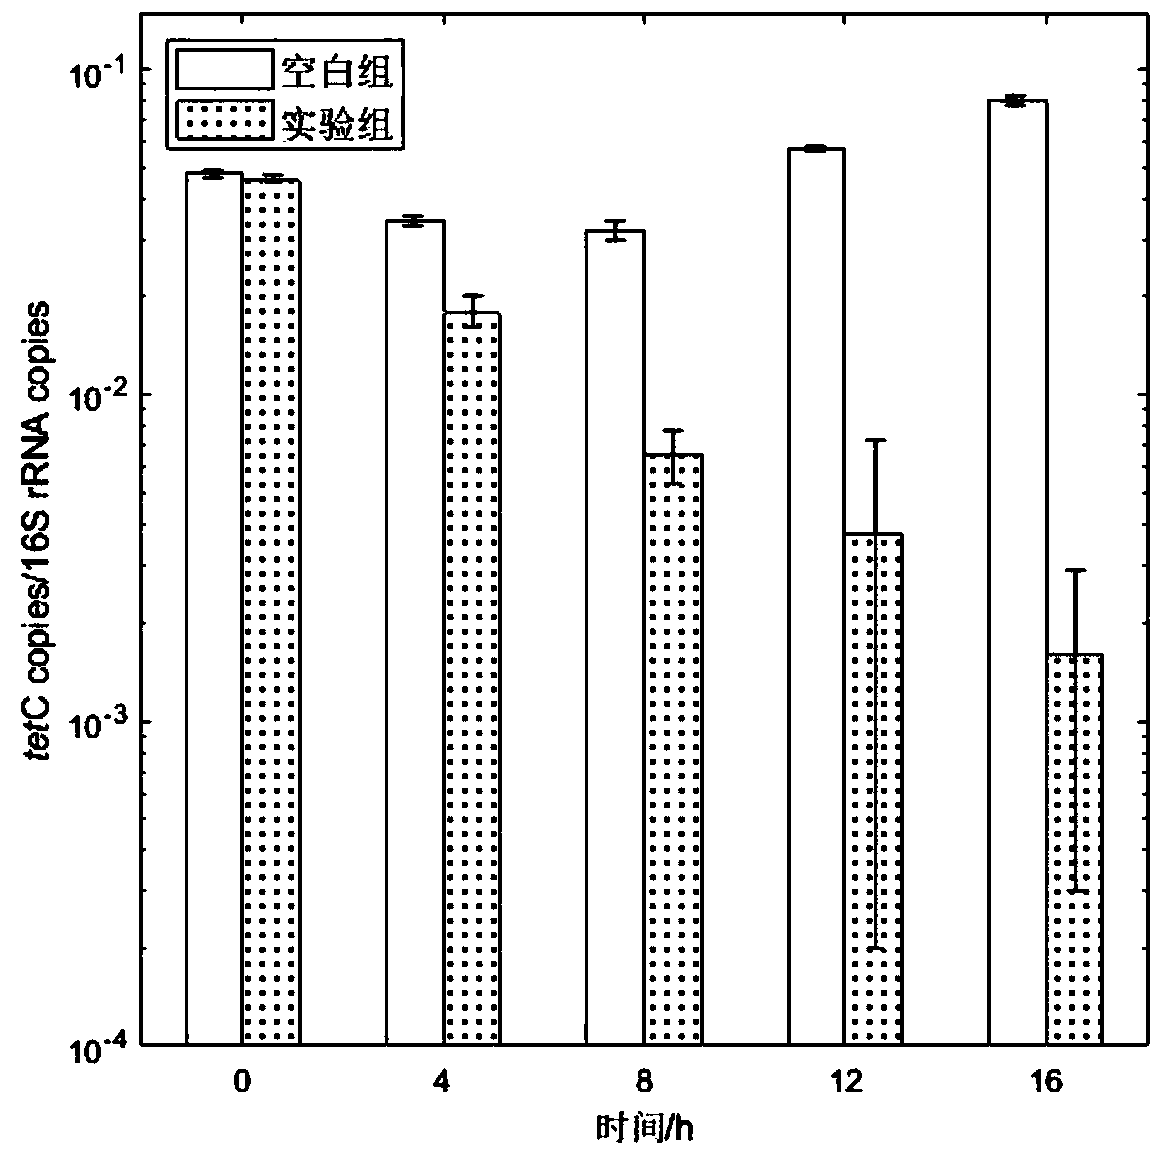 Methods of using microbial cleavage reactions to reduce abundance of multiple antibiotic resistance genes in excess sludge and limit their level transfer